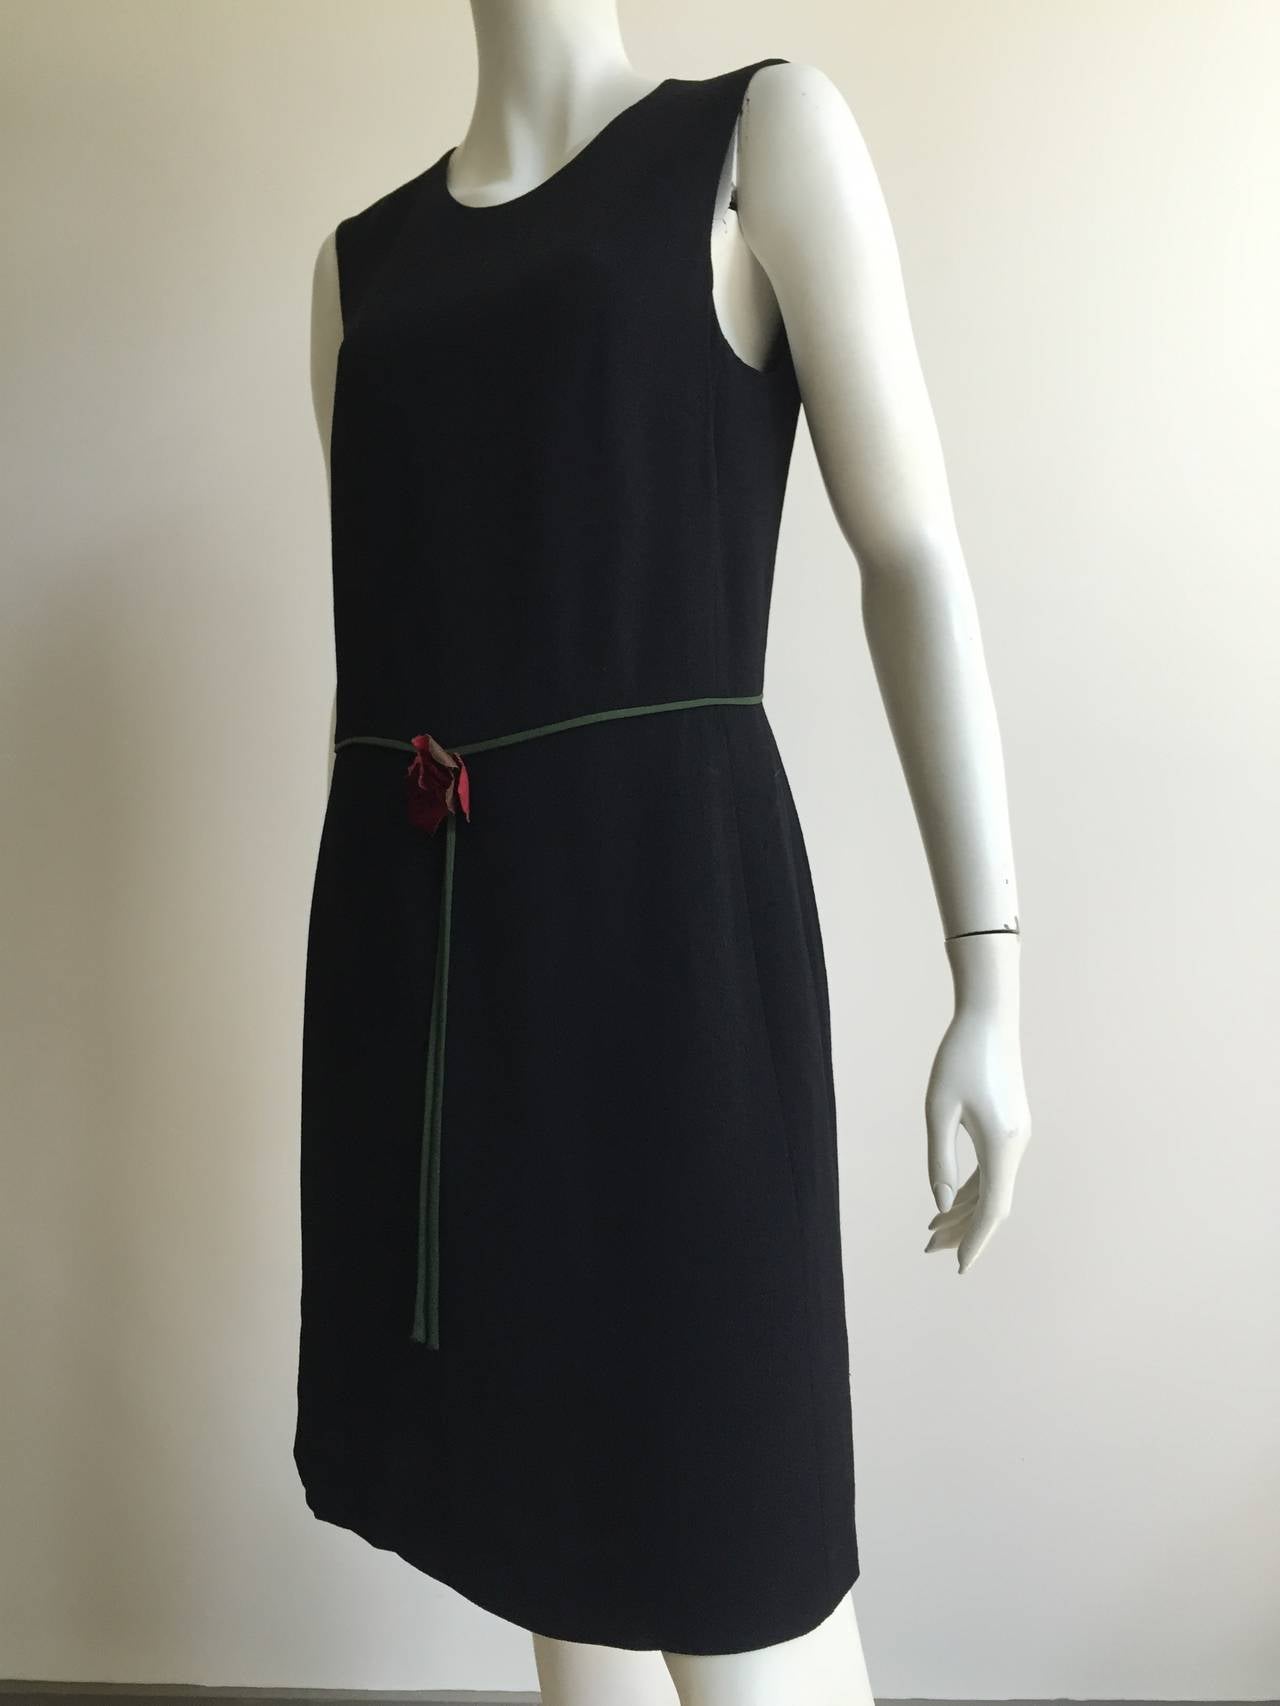 Moschino Black Dress Size 12. For Sale at 1stdibs